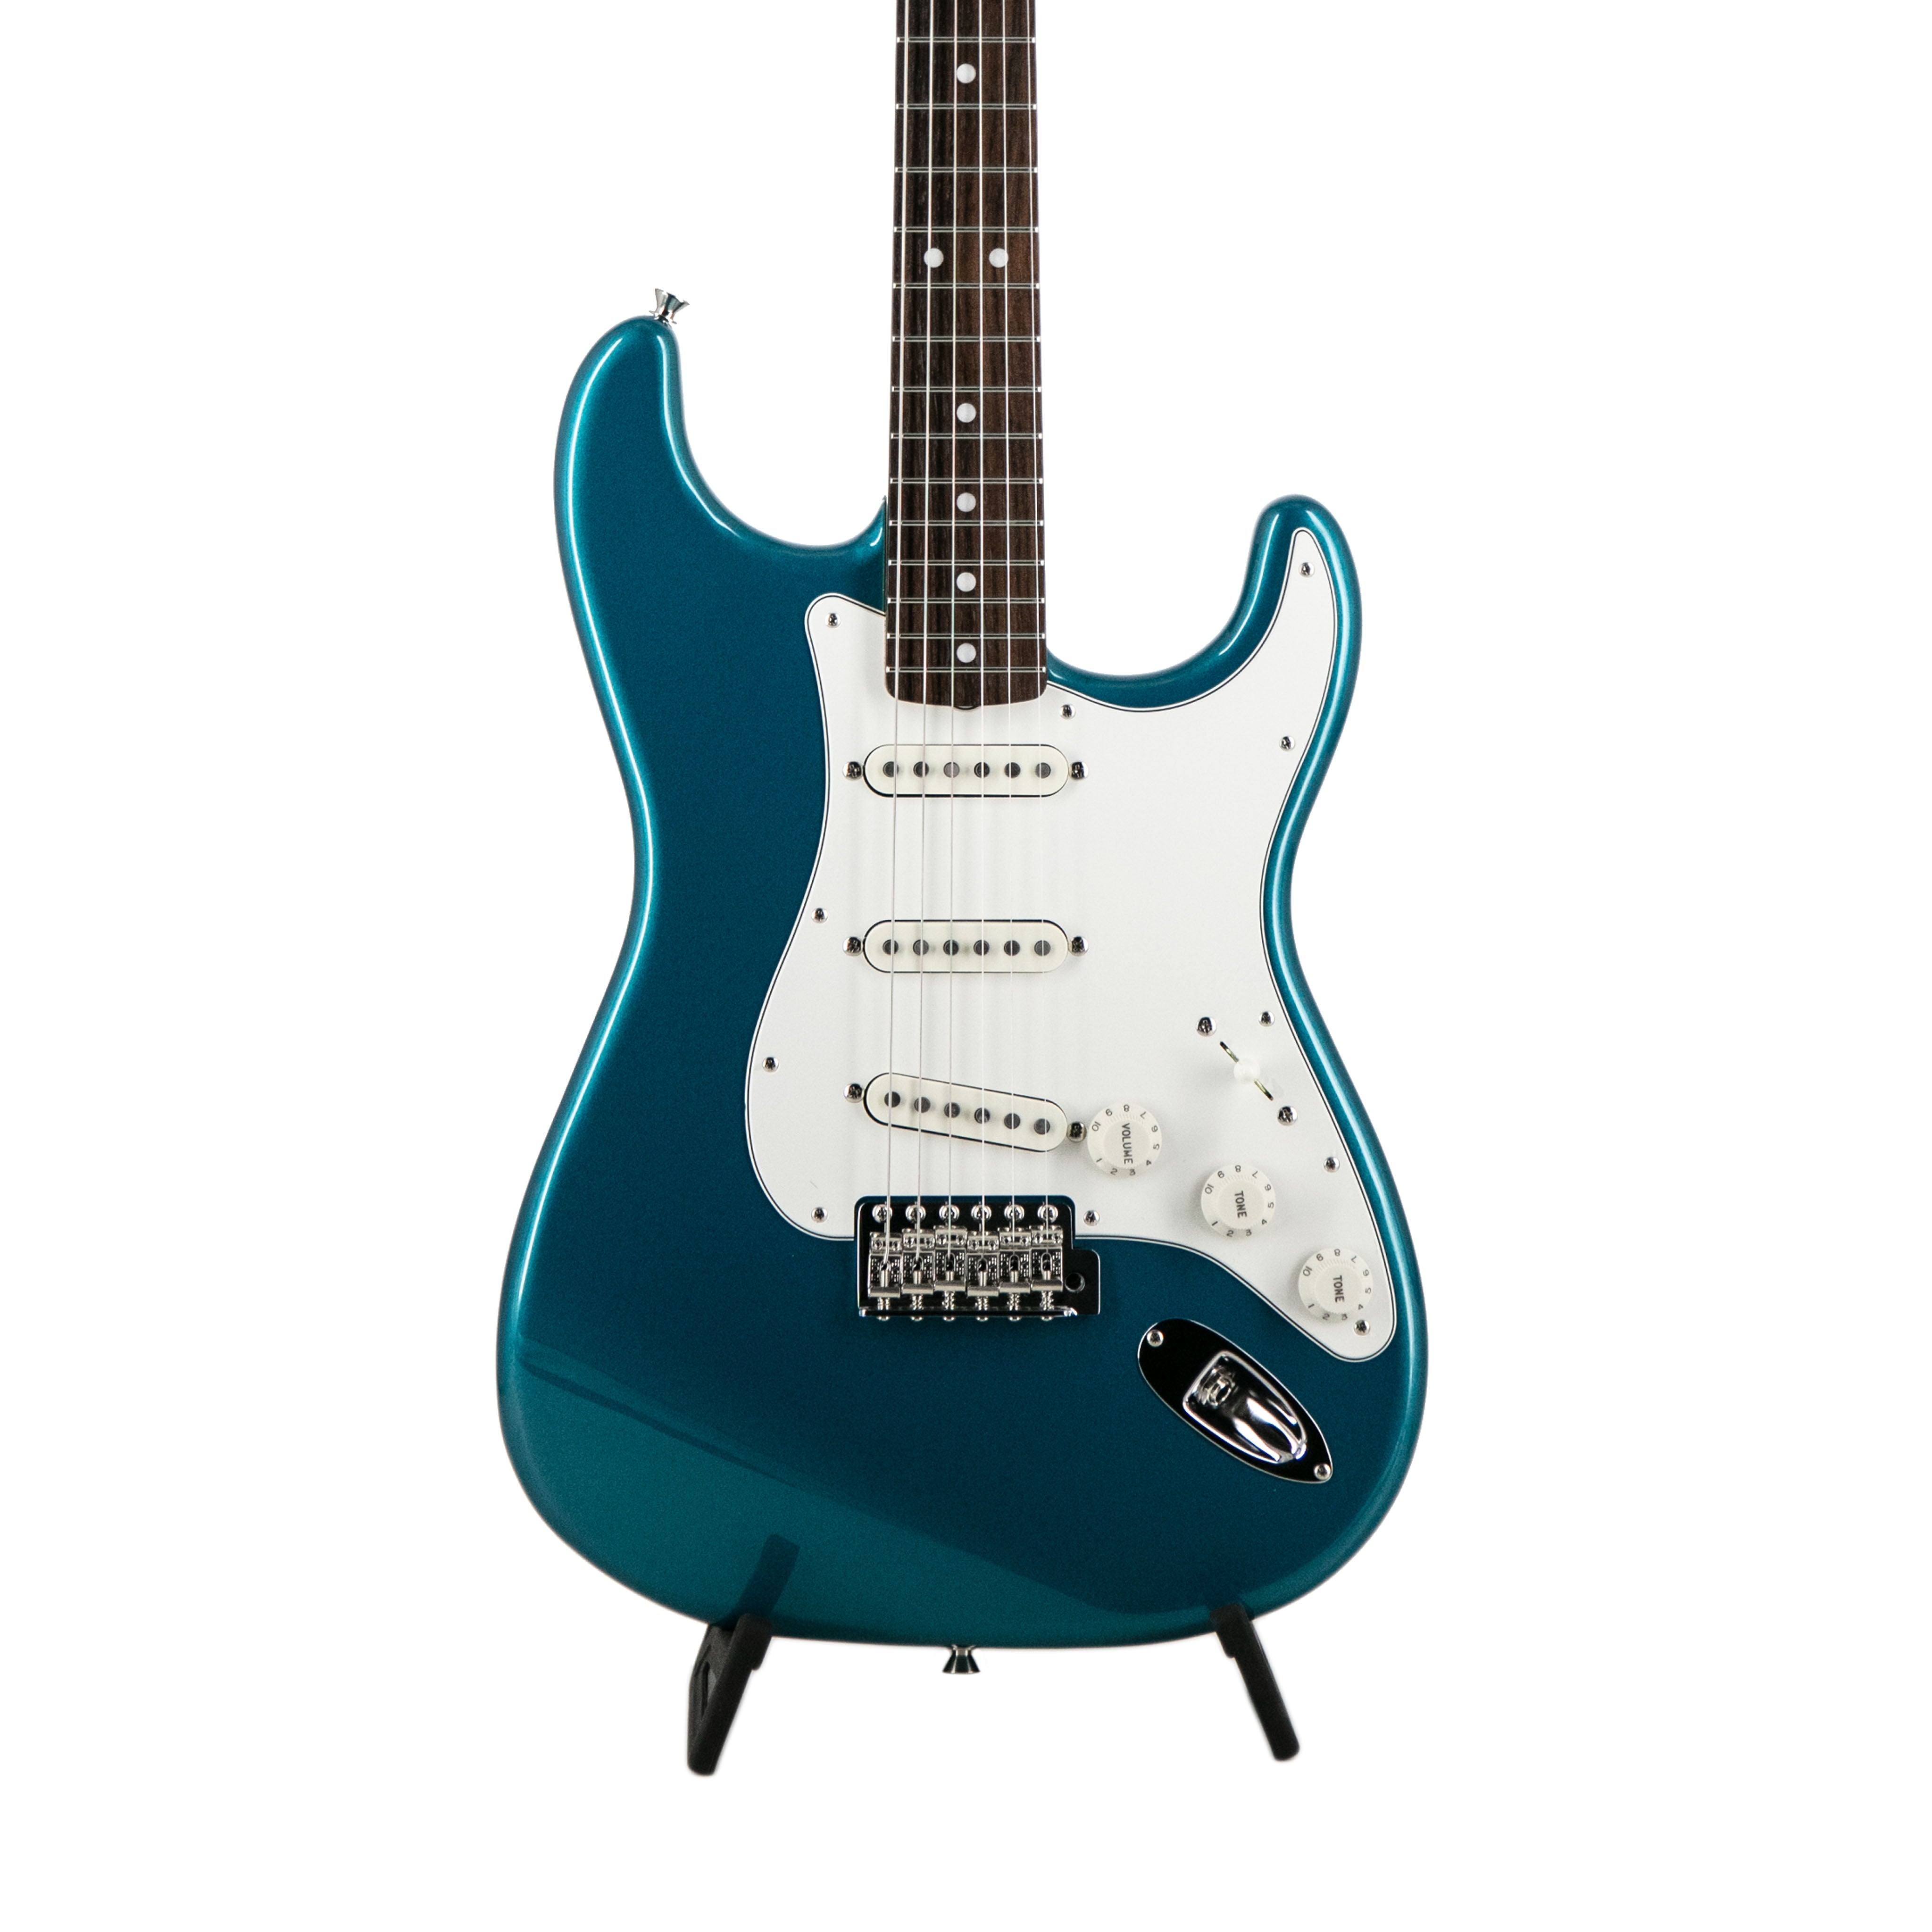 Fender FSR Collection Traditional Late 60s Stratocaster Guitar, RW FB, Ocean Turquoise Metallic | Zoso Music Sdn Bhd